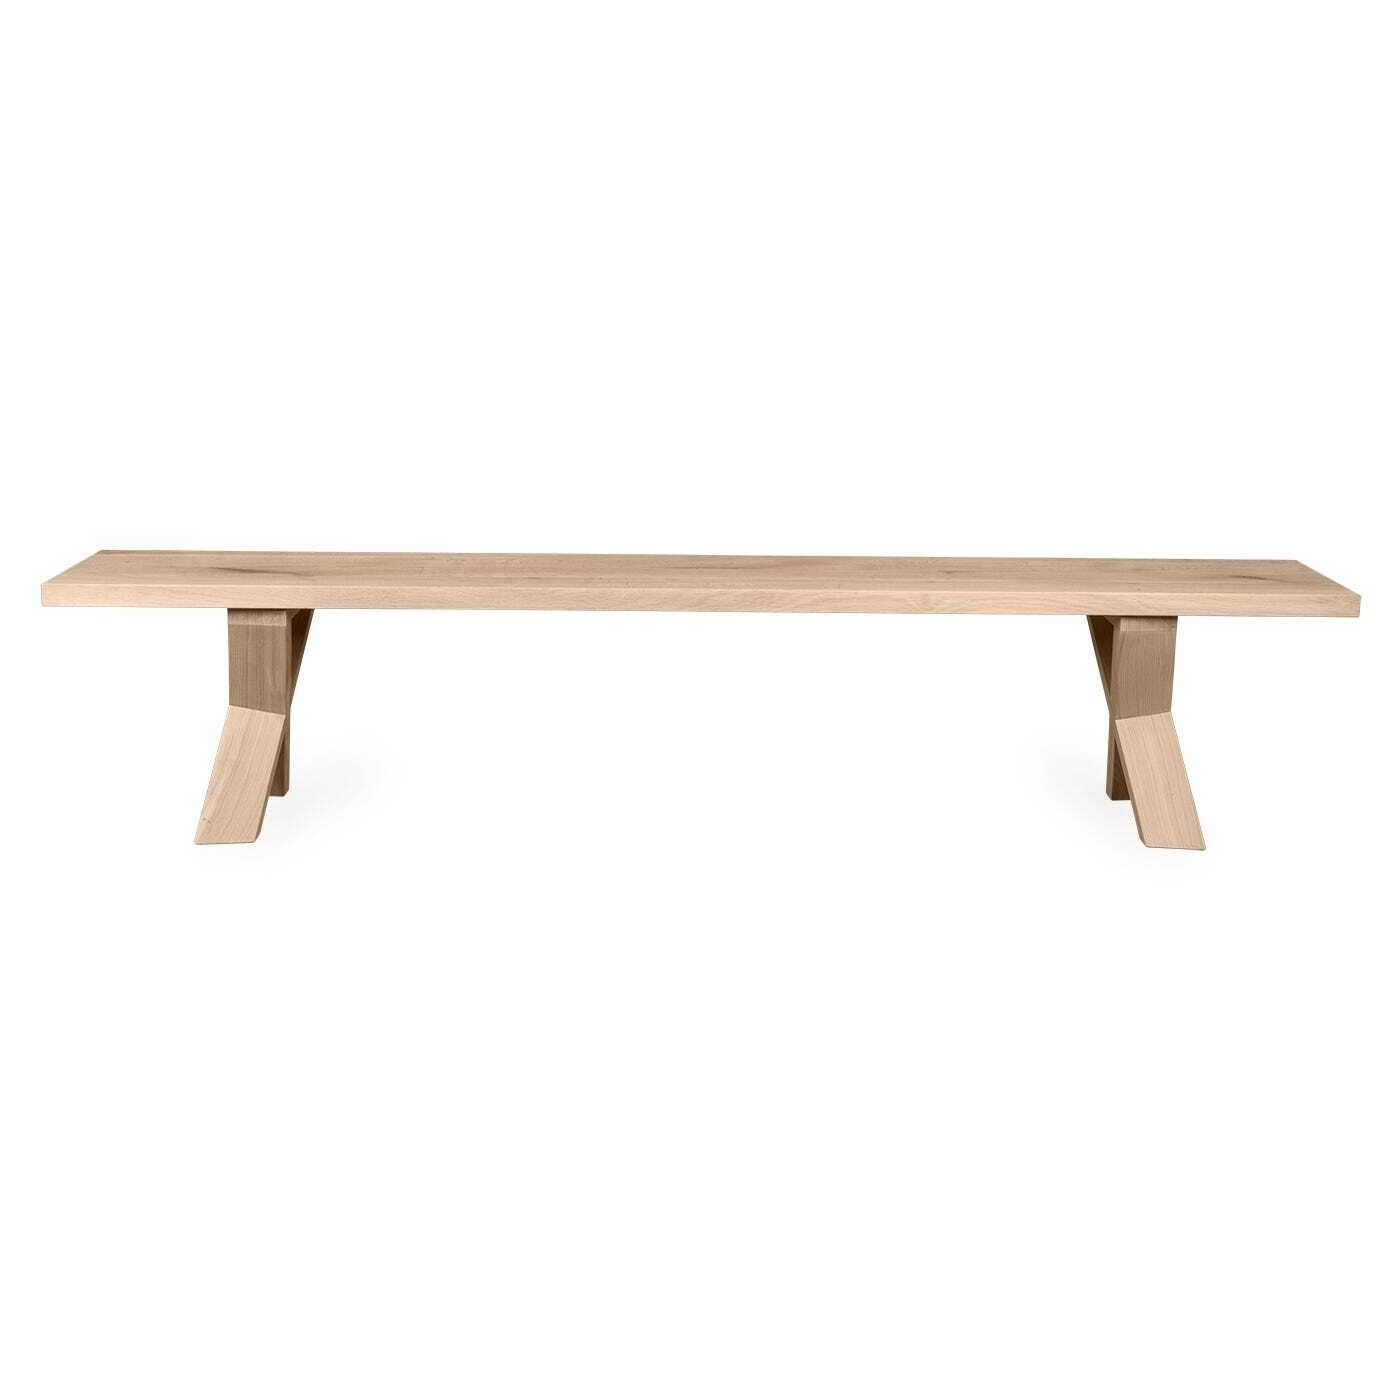 Heal's Oslo Bench 160x35cm Blonde Oiled Oak Natural Edge Not Filled